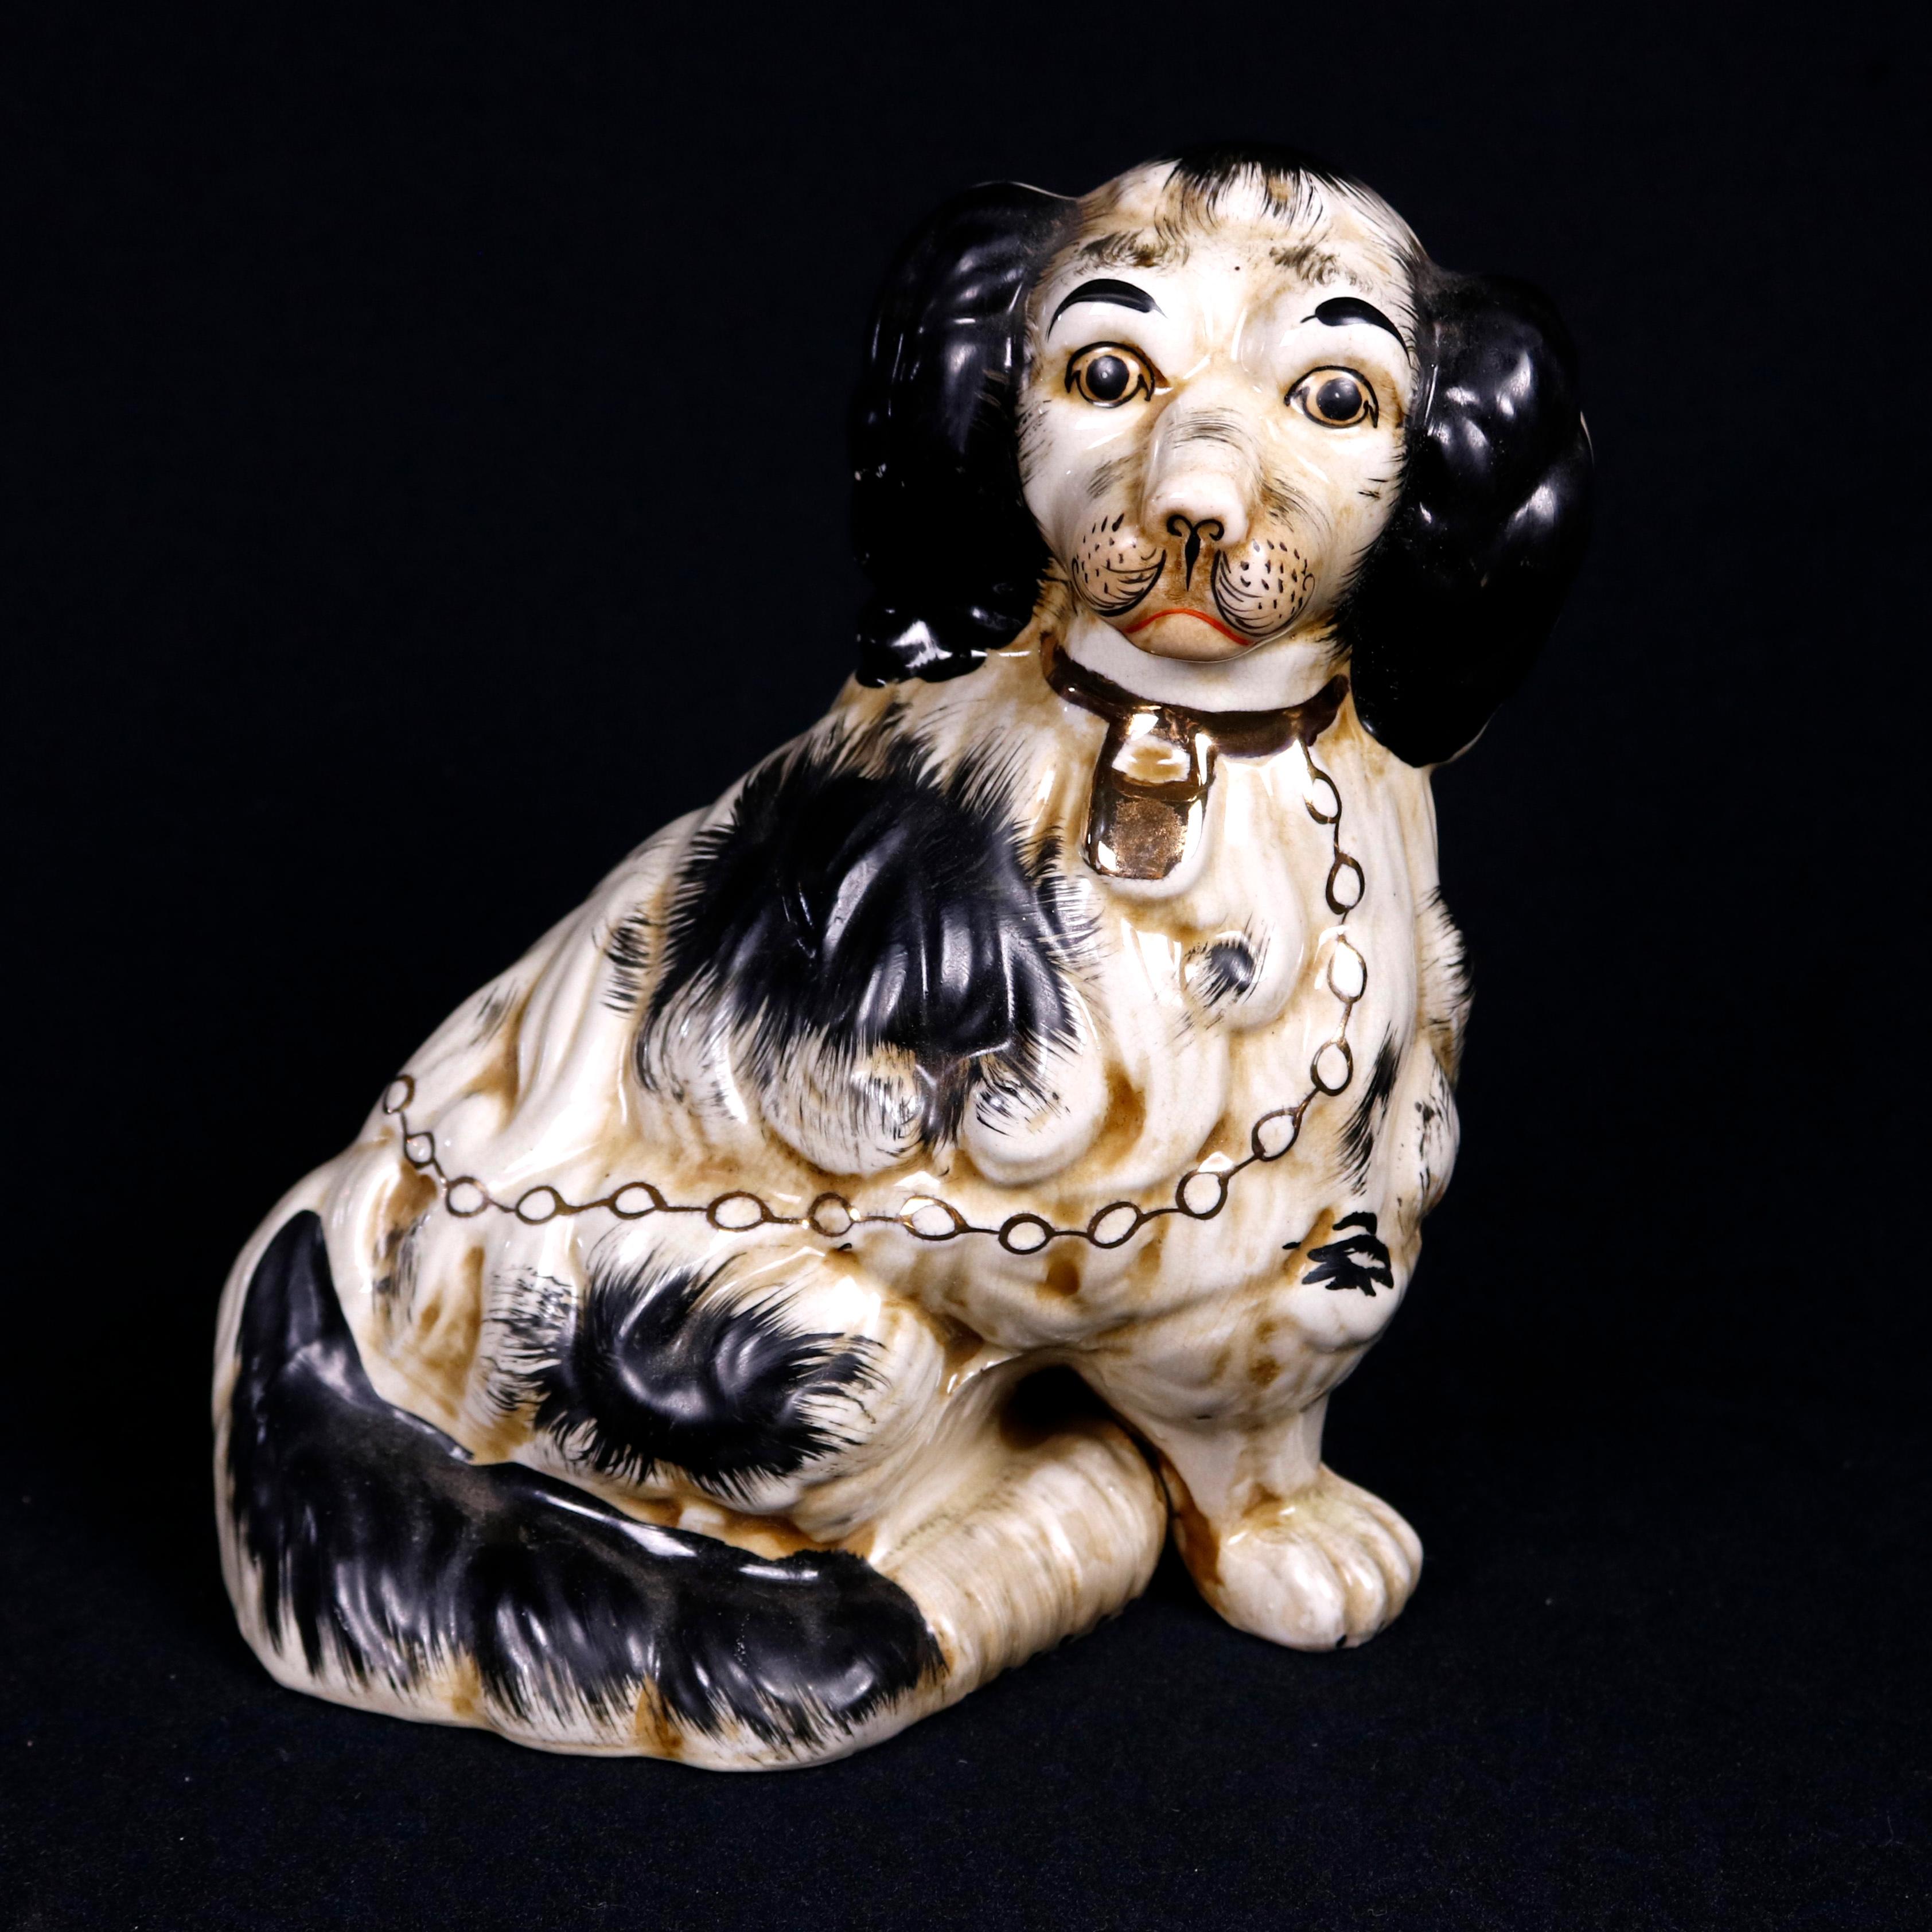 A pair of English figural Staffordshire pottery dogs offer spaniel form with black and white coloring, 20th century

***DELIVERY NOTICE – Due to COVID-19 we are employing NO-CONTACT PRACTICES in the transfer of purchased items.  Additionally, for